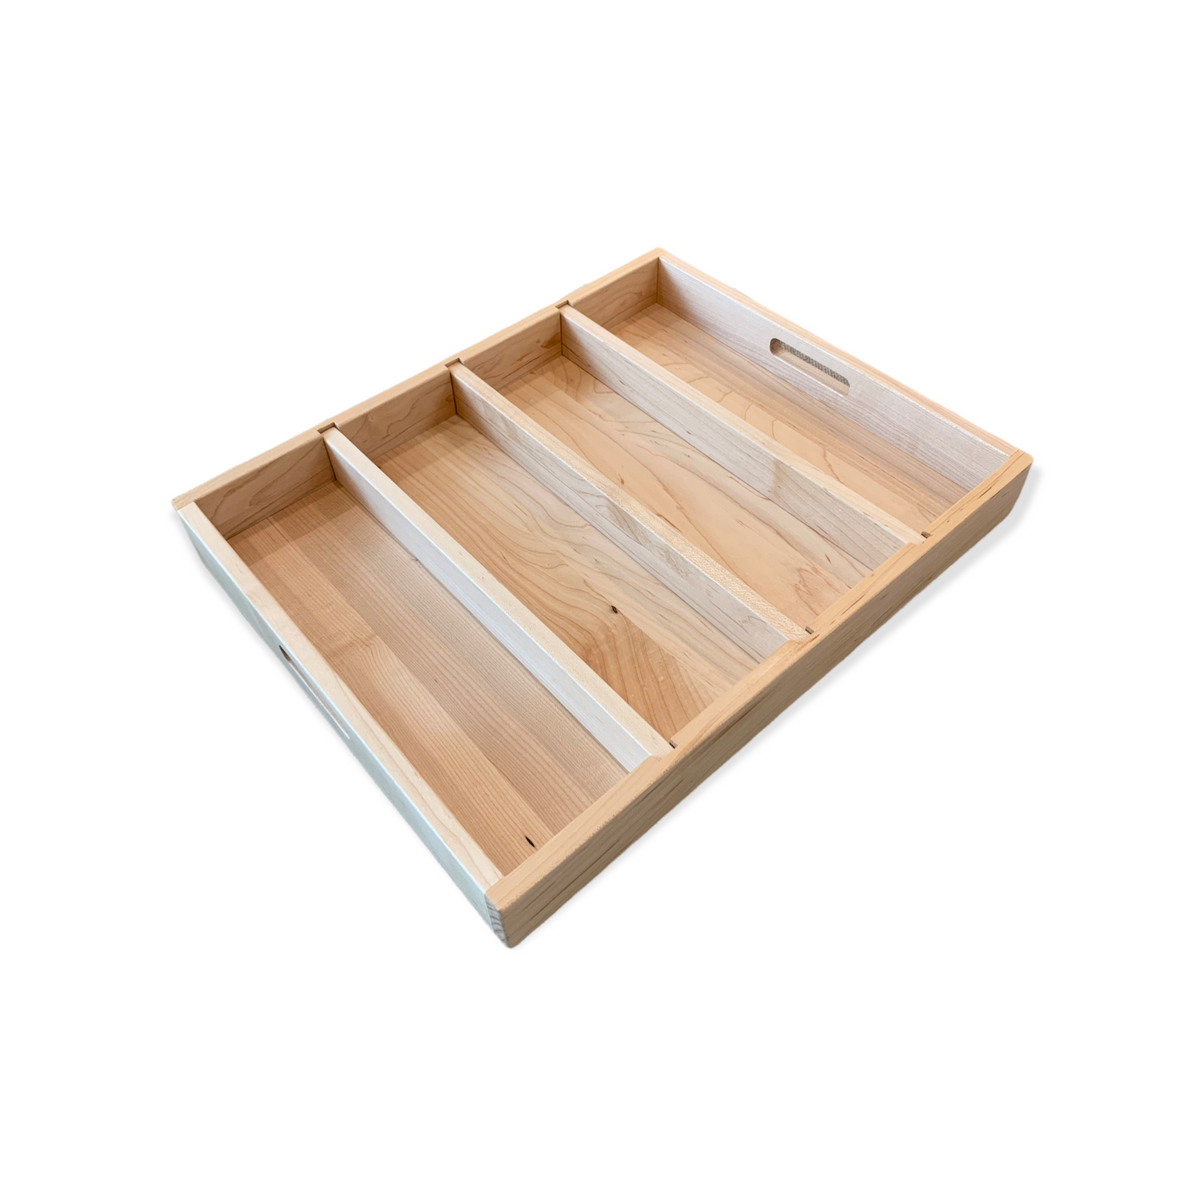 TO BE DISCONTINUED: Activity Tray